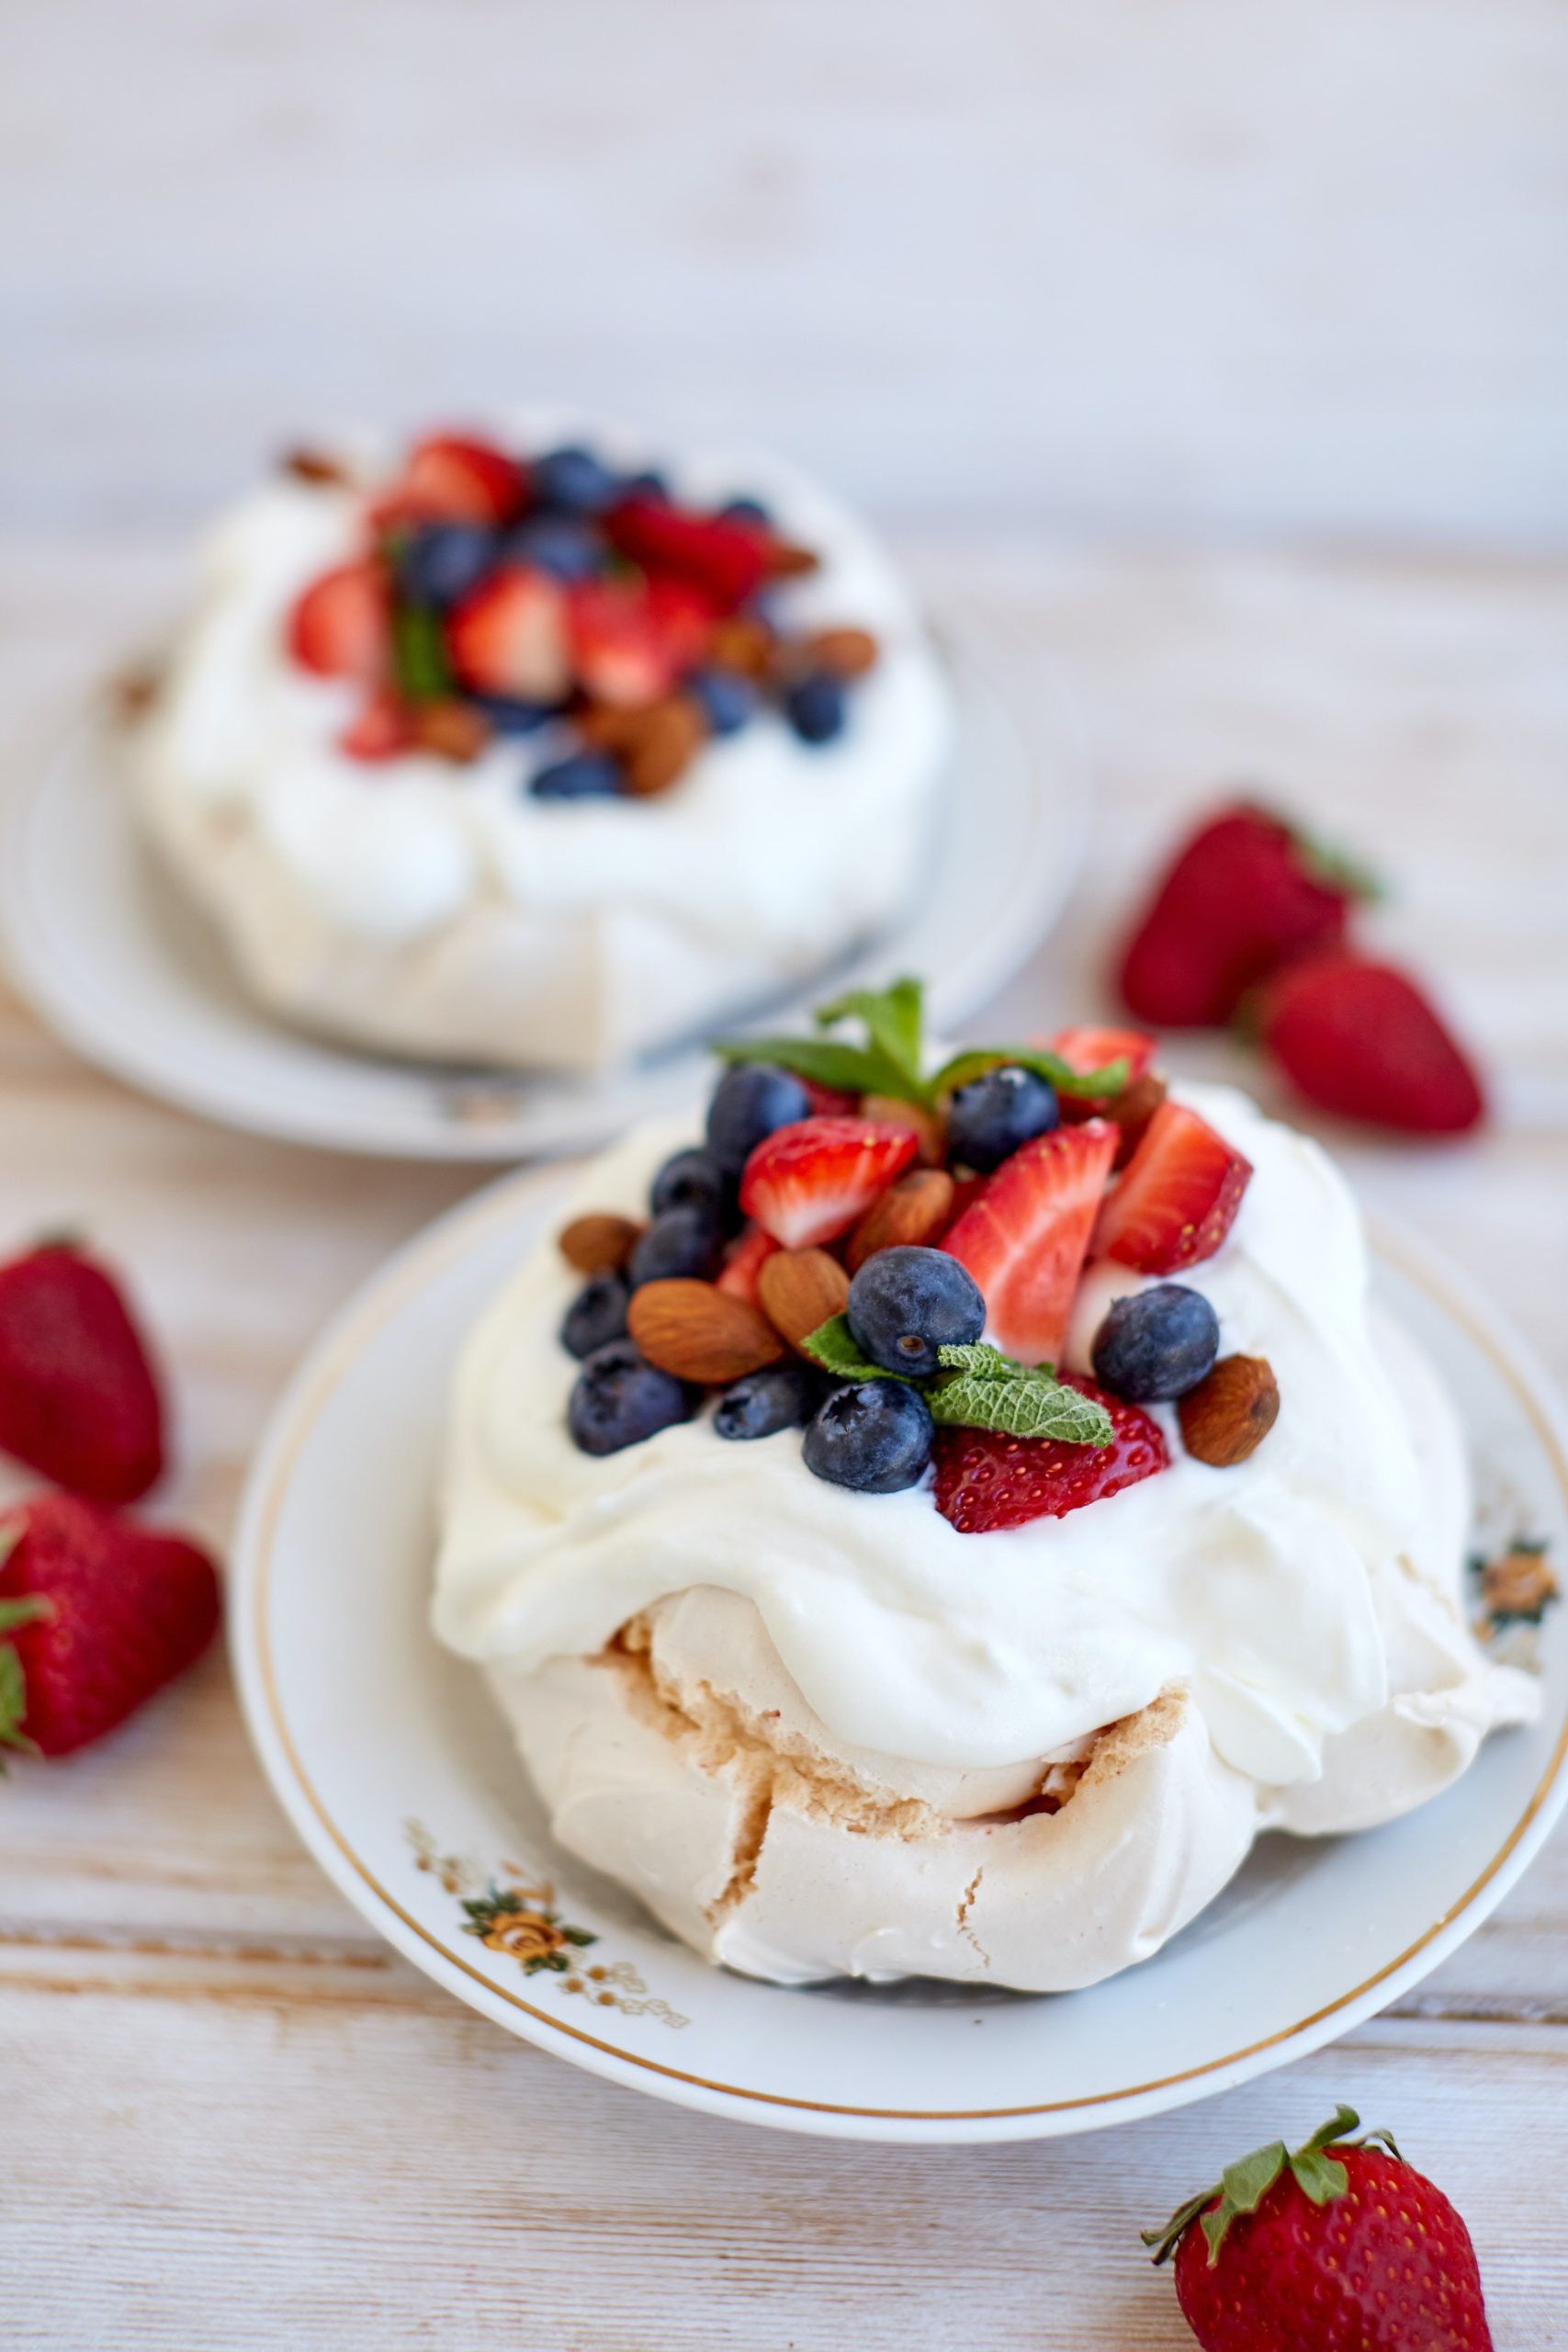 Easiest pavlova recipe The best ever Top recipe Tried and Tested